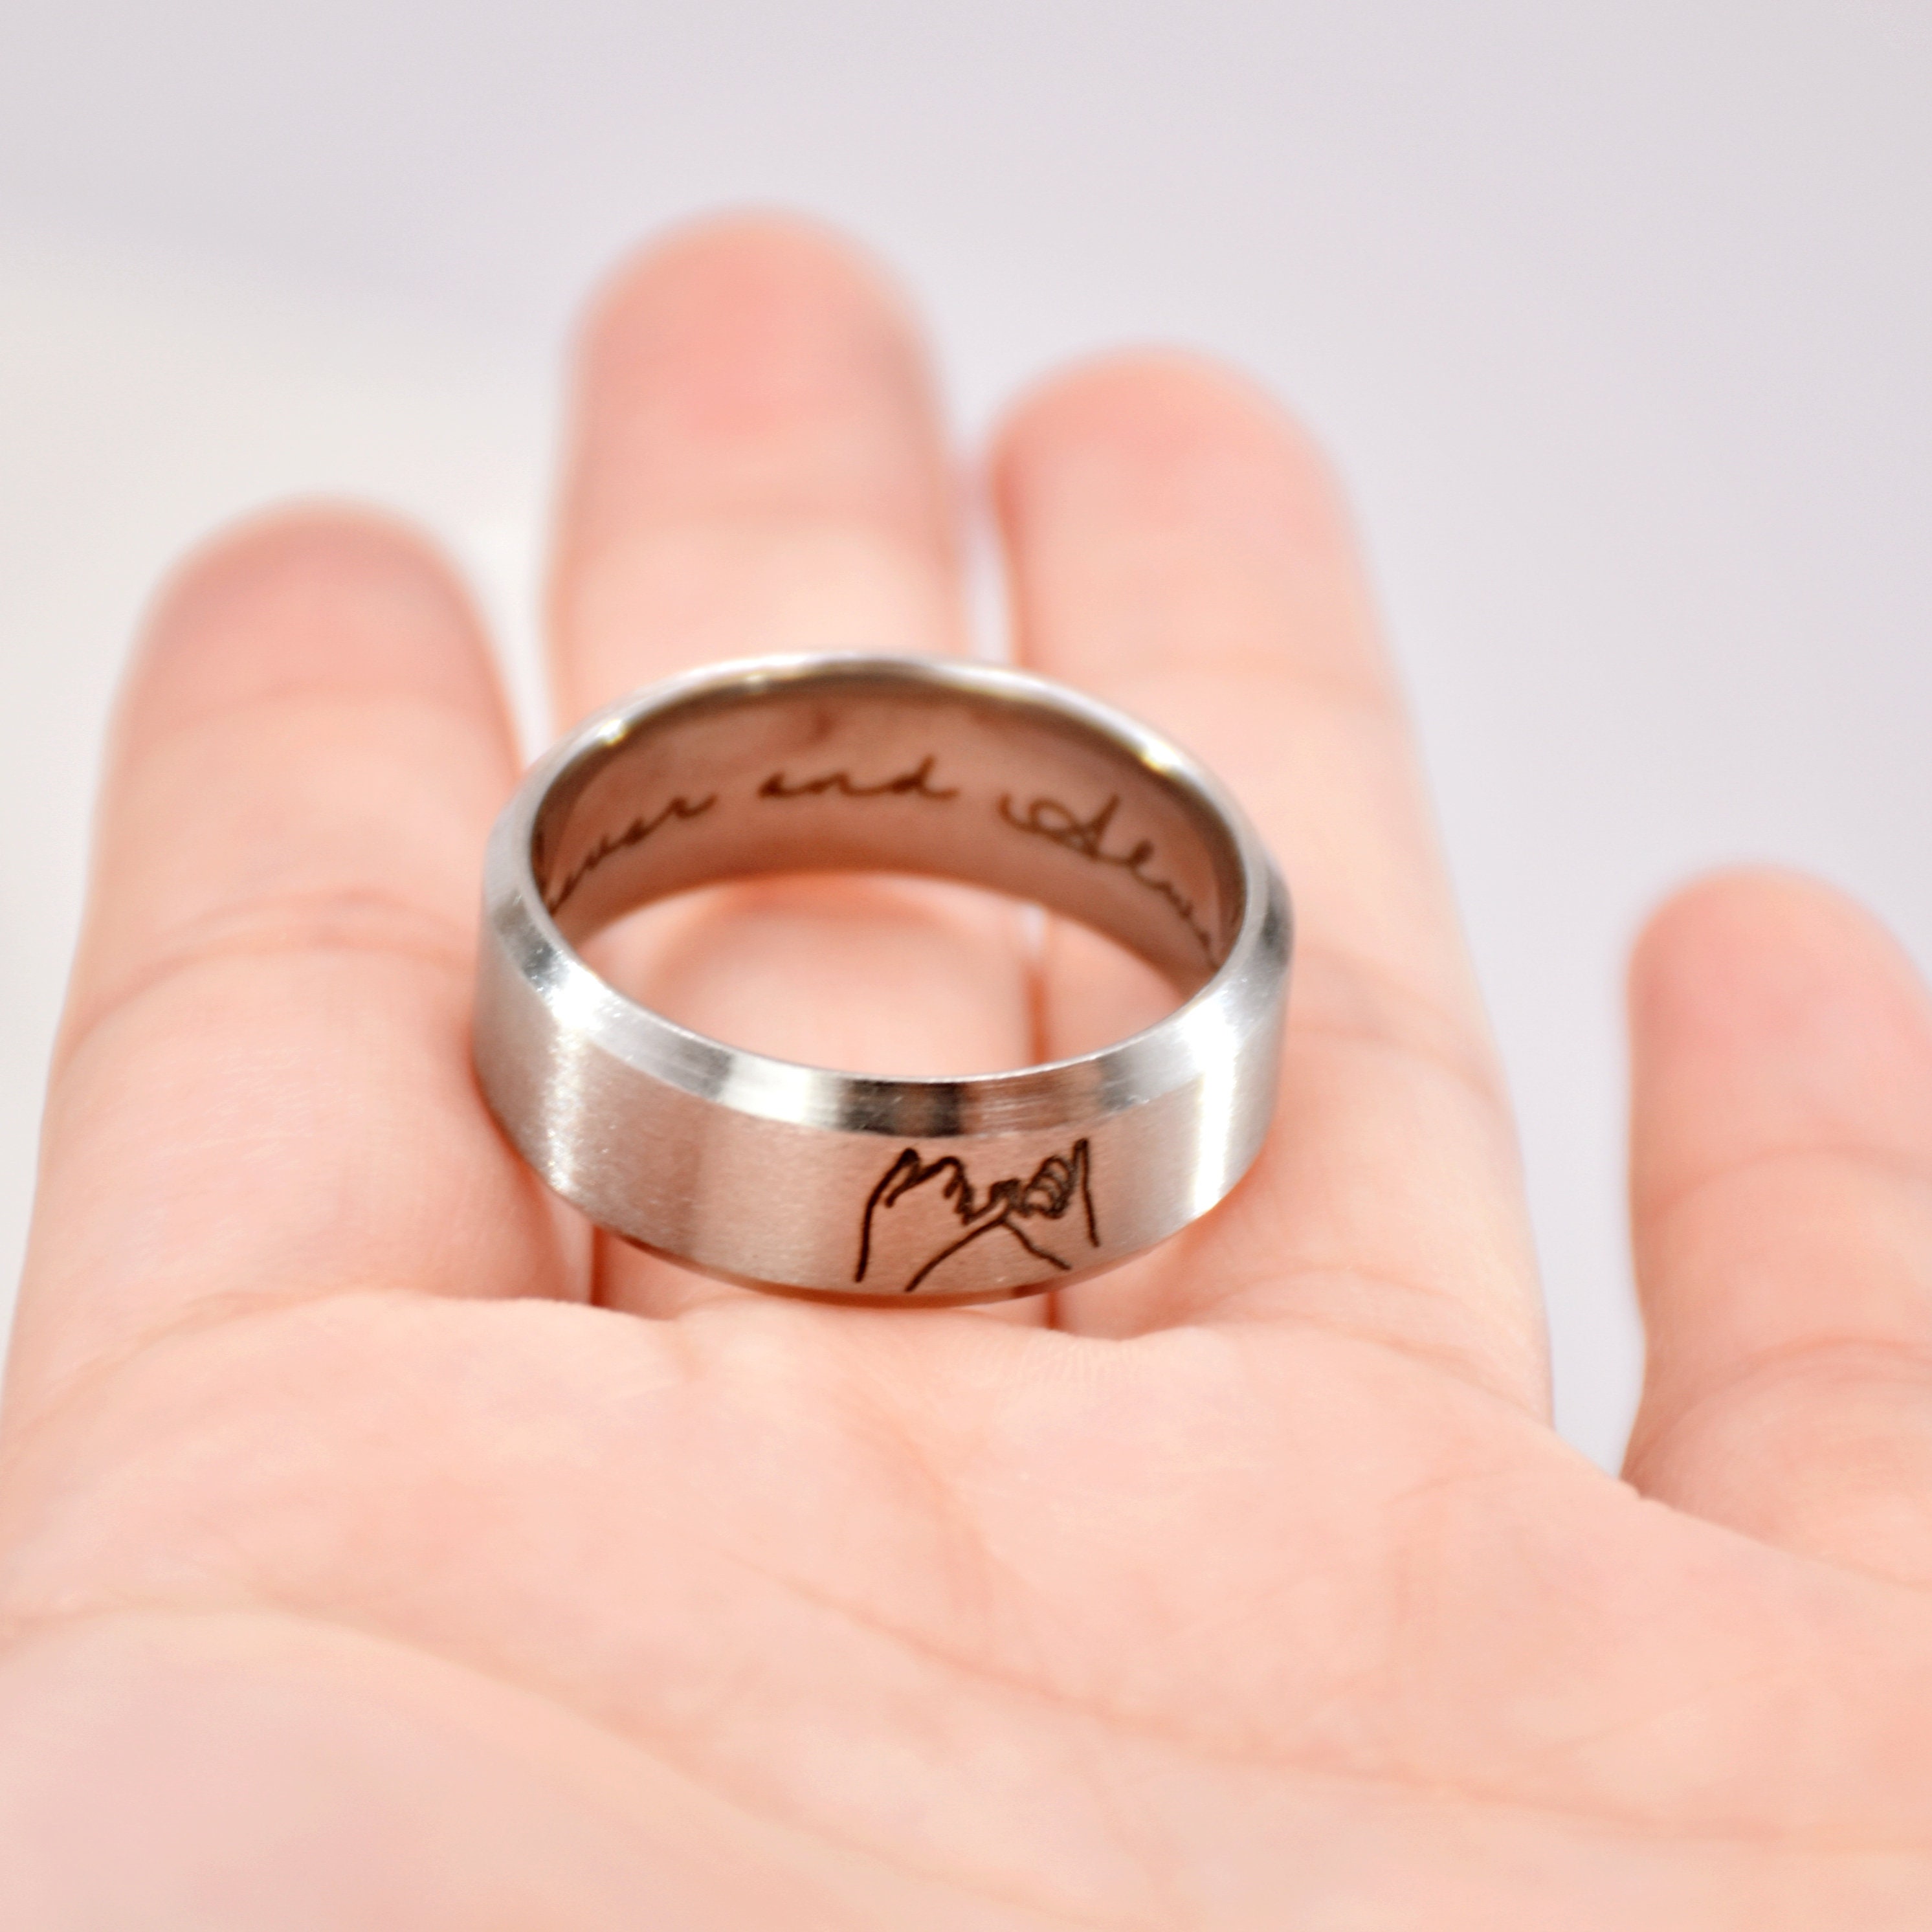 Personalize INSIDE ENGRAVED RING for Woman Custom Engrave Stack Ring  Sterling Silver as Pinky Promise Ring Engrave Inside Engrave Pinky Ring -  Etsy | Promise rings for guys, Pinky promise ring, Engraved rings